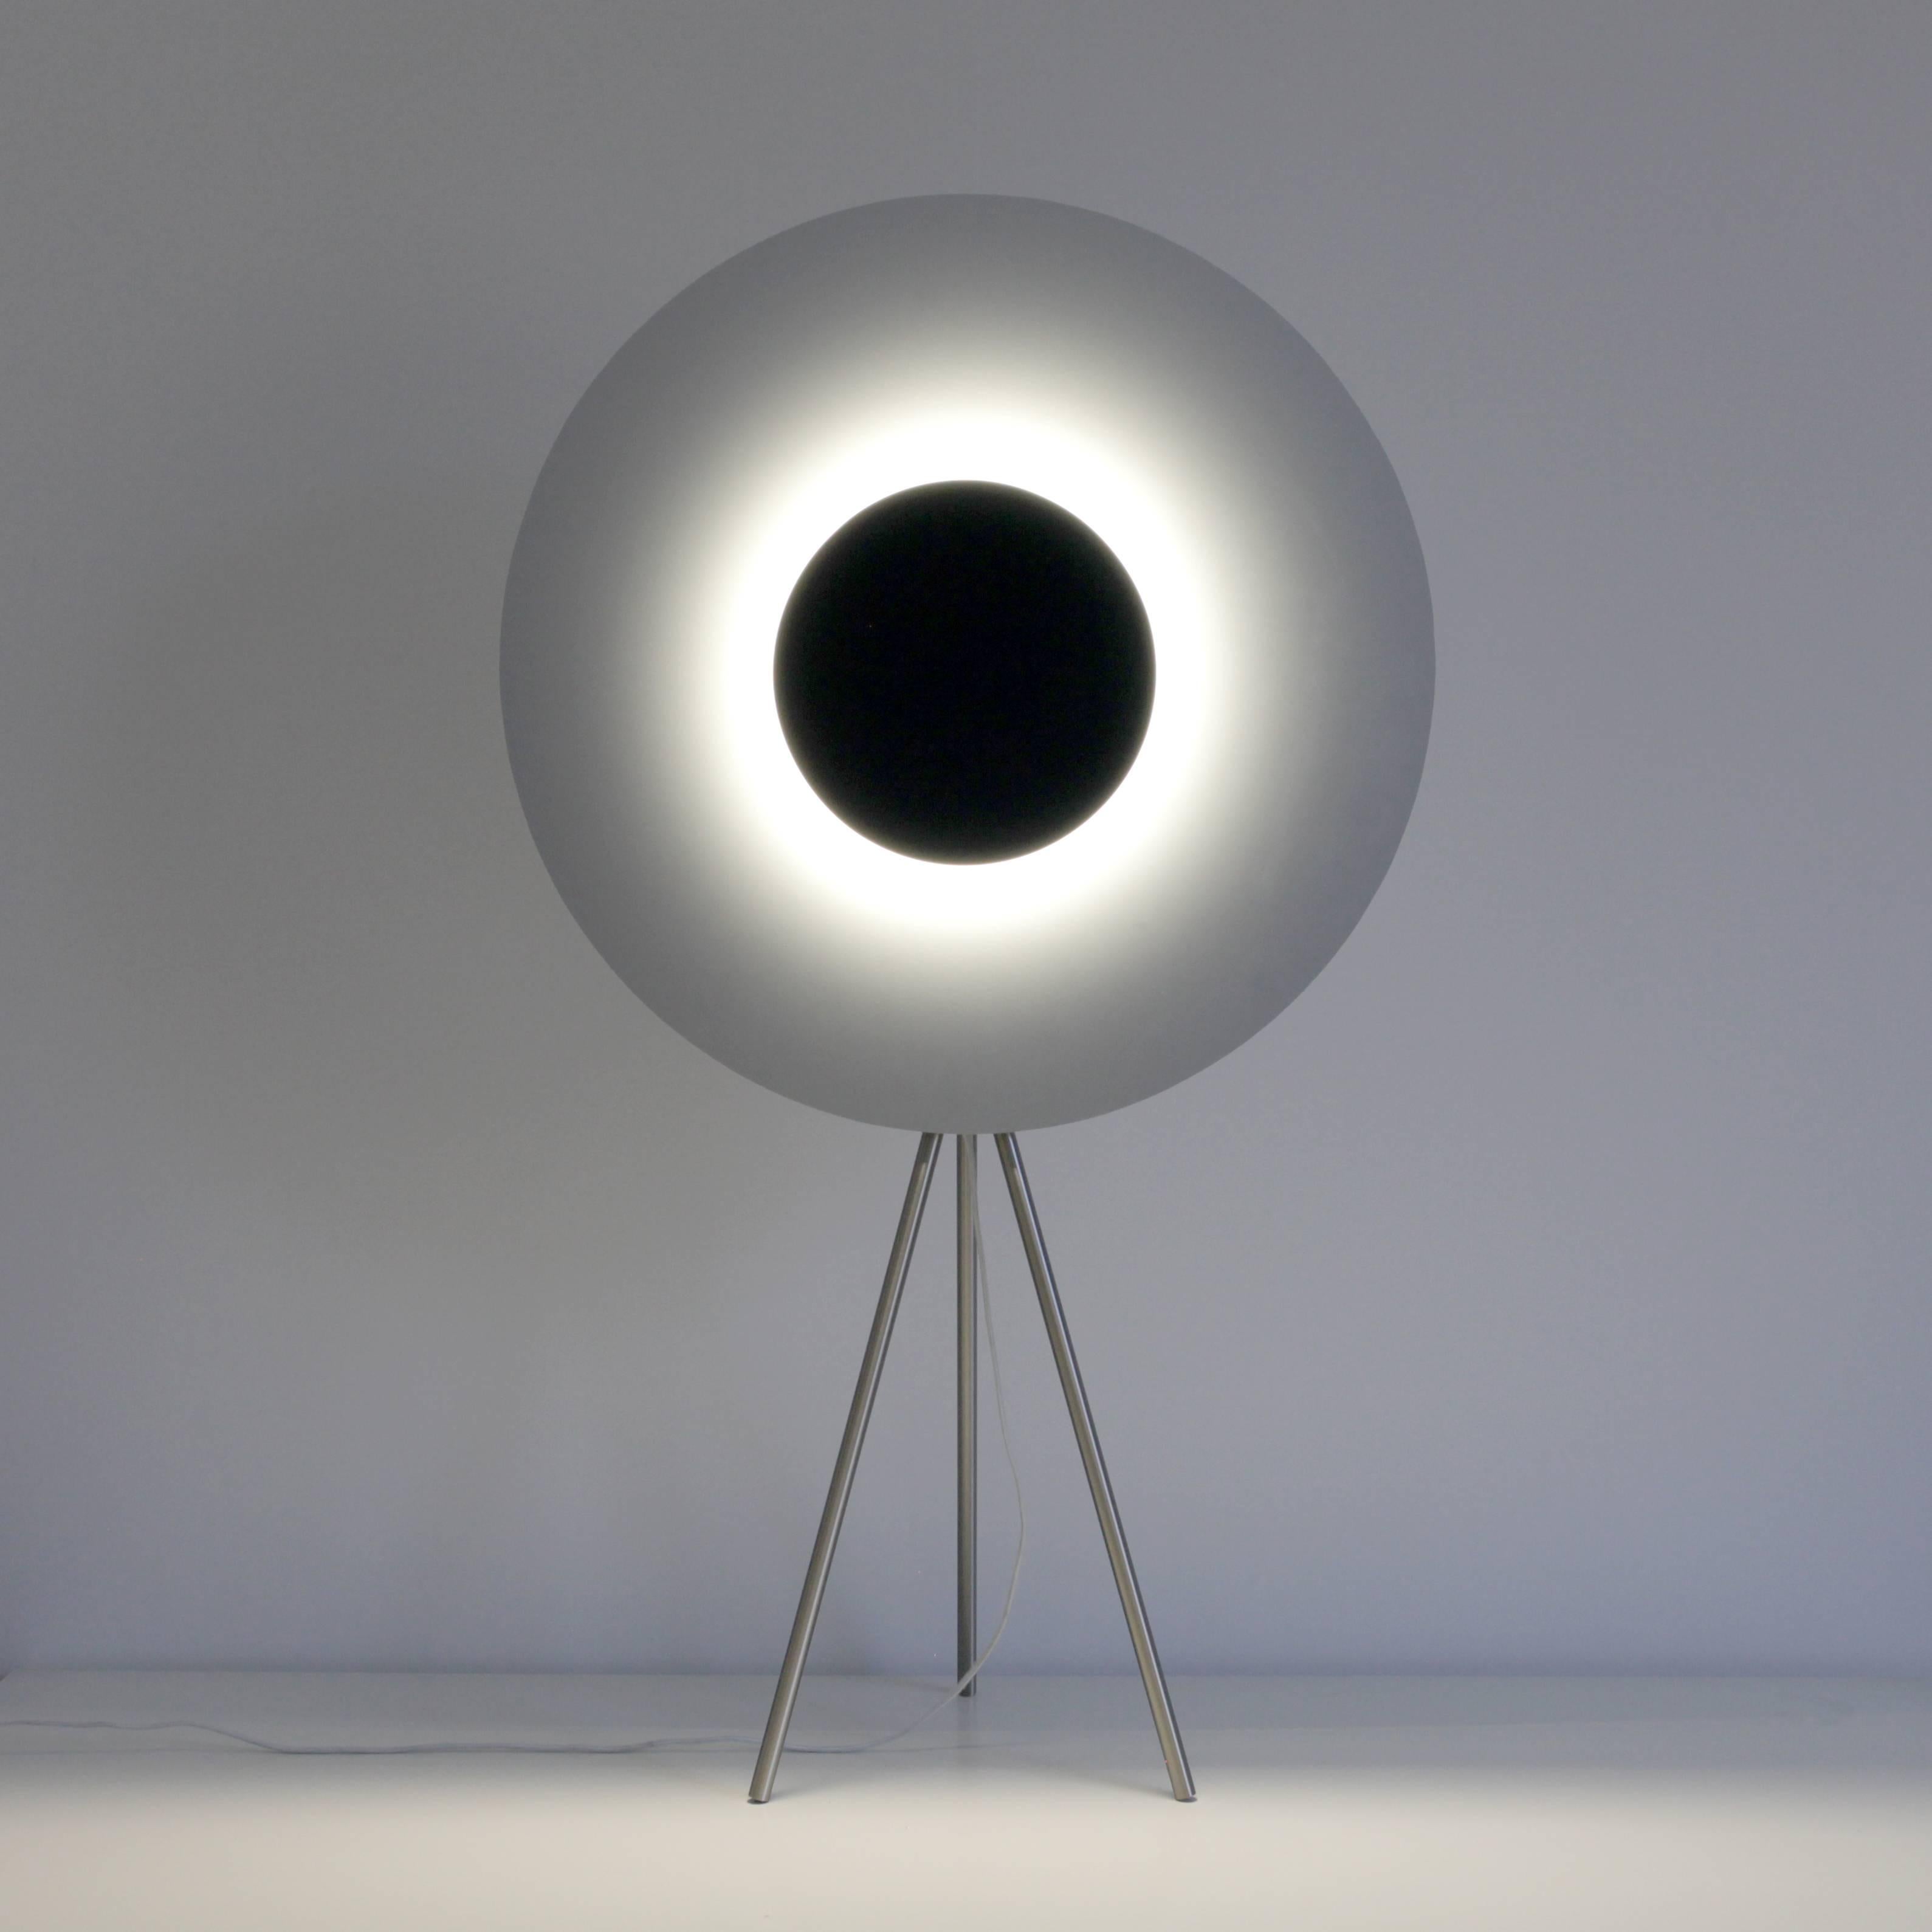 Eclipse table lamp by Arturo Erbsman (Handcrafted design artwork by Arturo Erbsman)
Limited edition, signed and numbered
Dimensions: 85 x 49 x 23 cm
Materials: anodized aluminum disc, mirror, LED spotlight, wood, steel base

All our lamps can